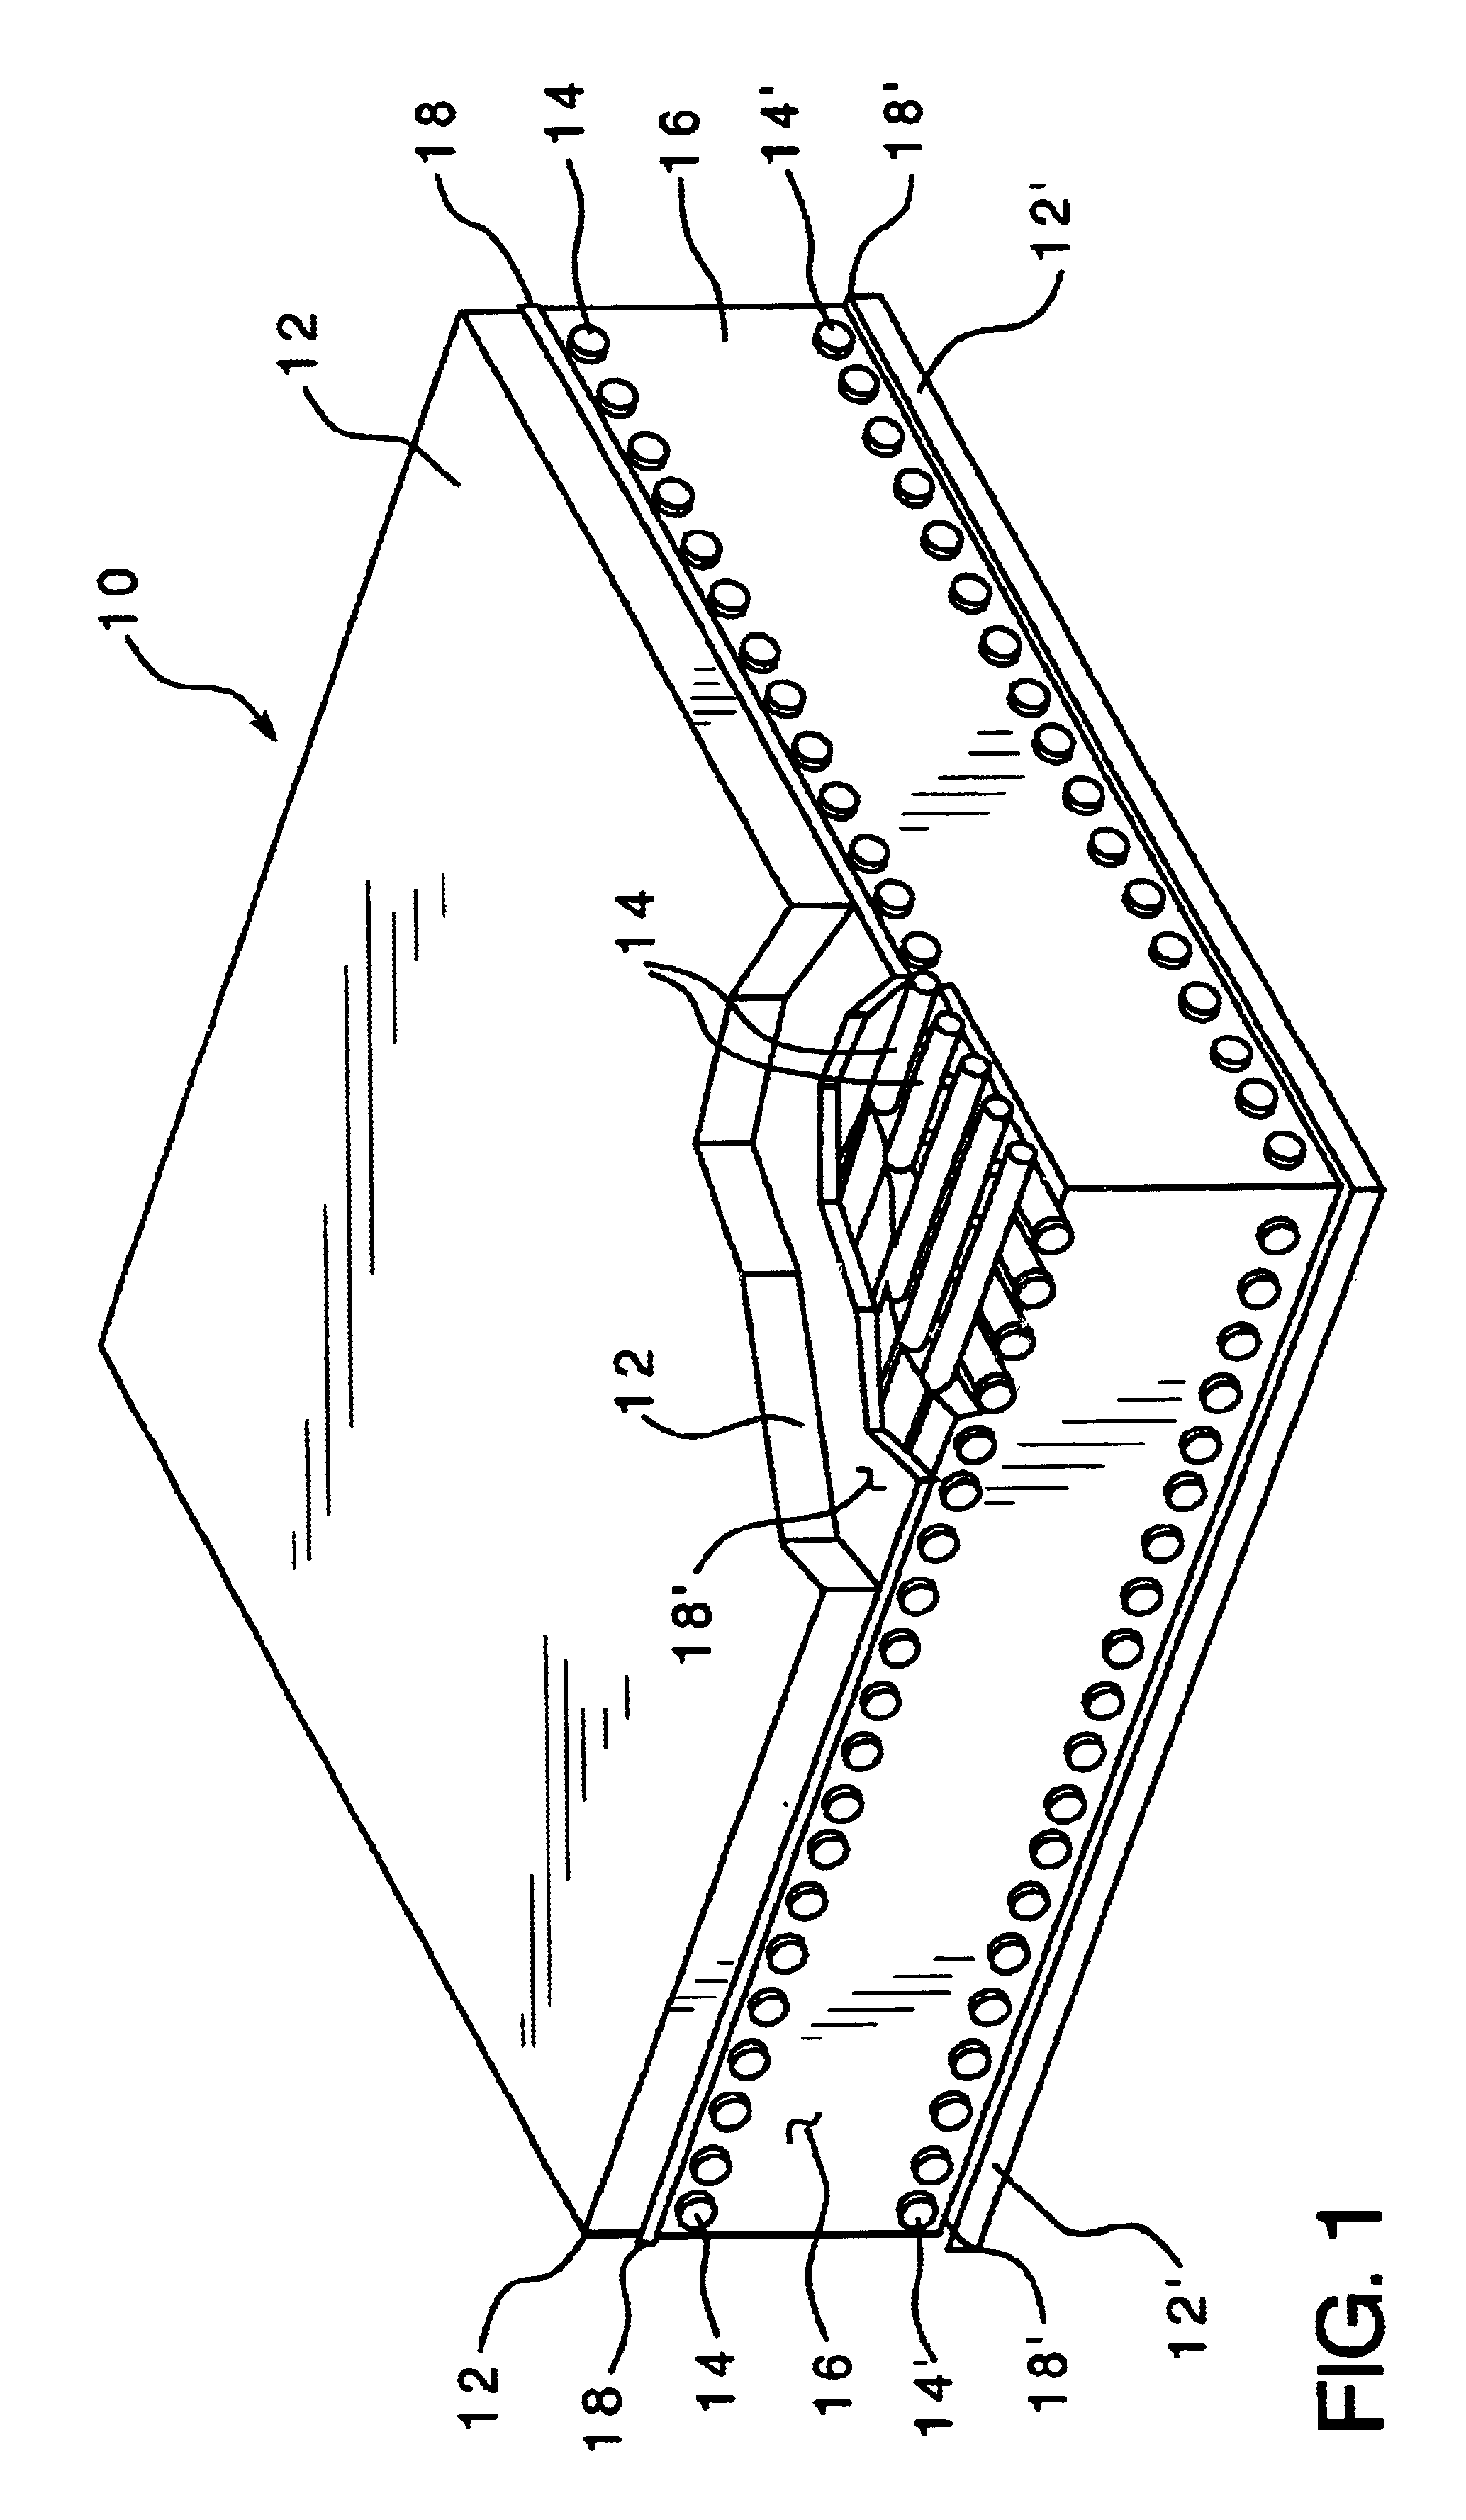 System and method of forming composite structures